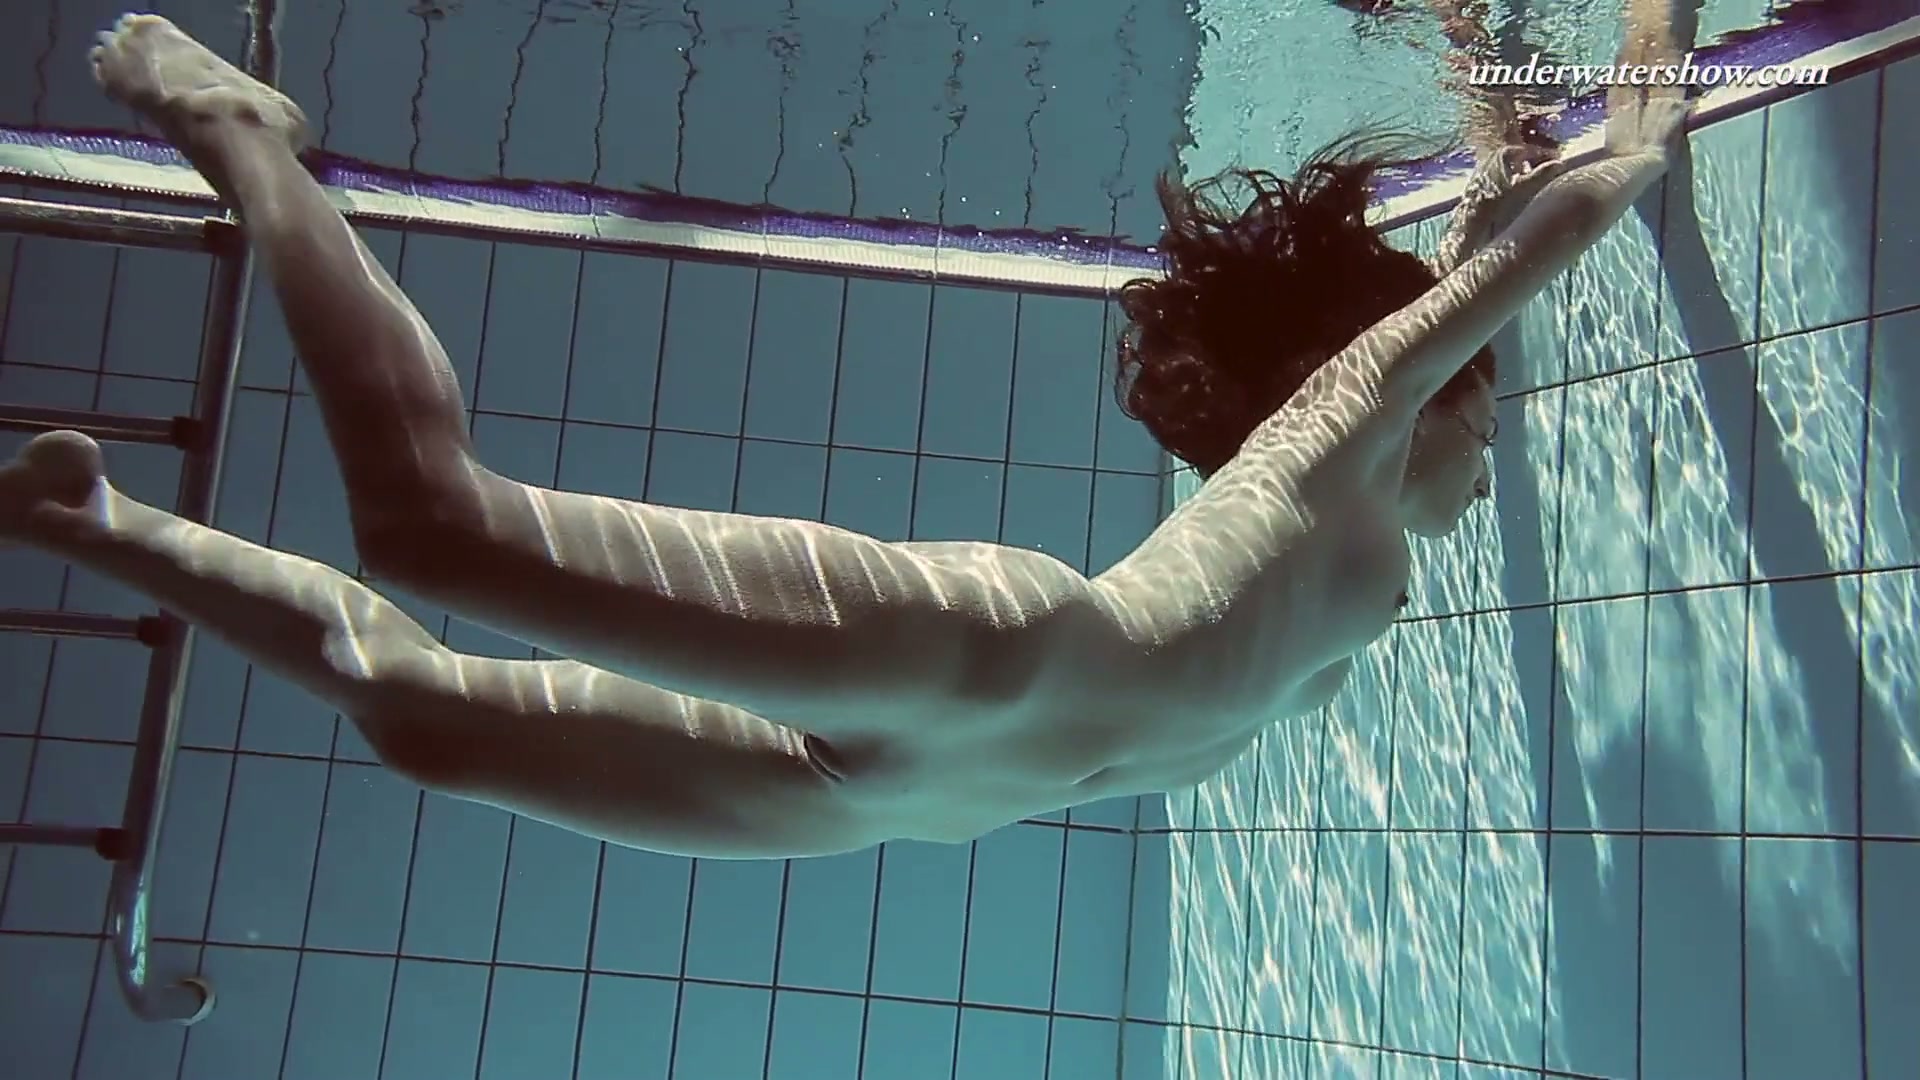 Gorgeous Sima swims naked in a pool exposing her beauty image pic